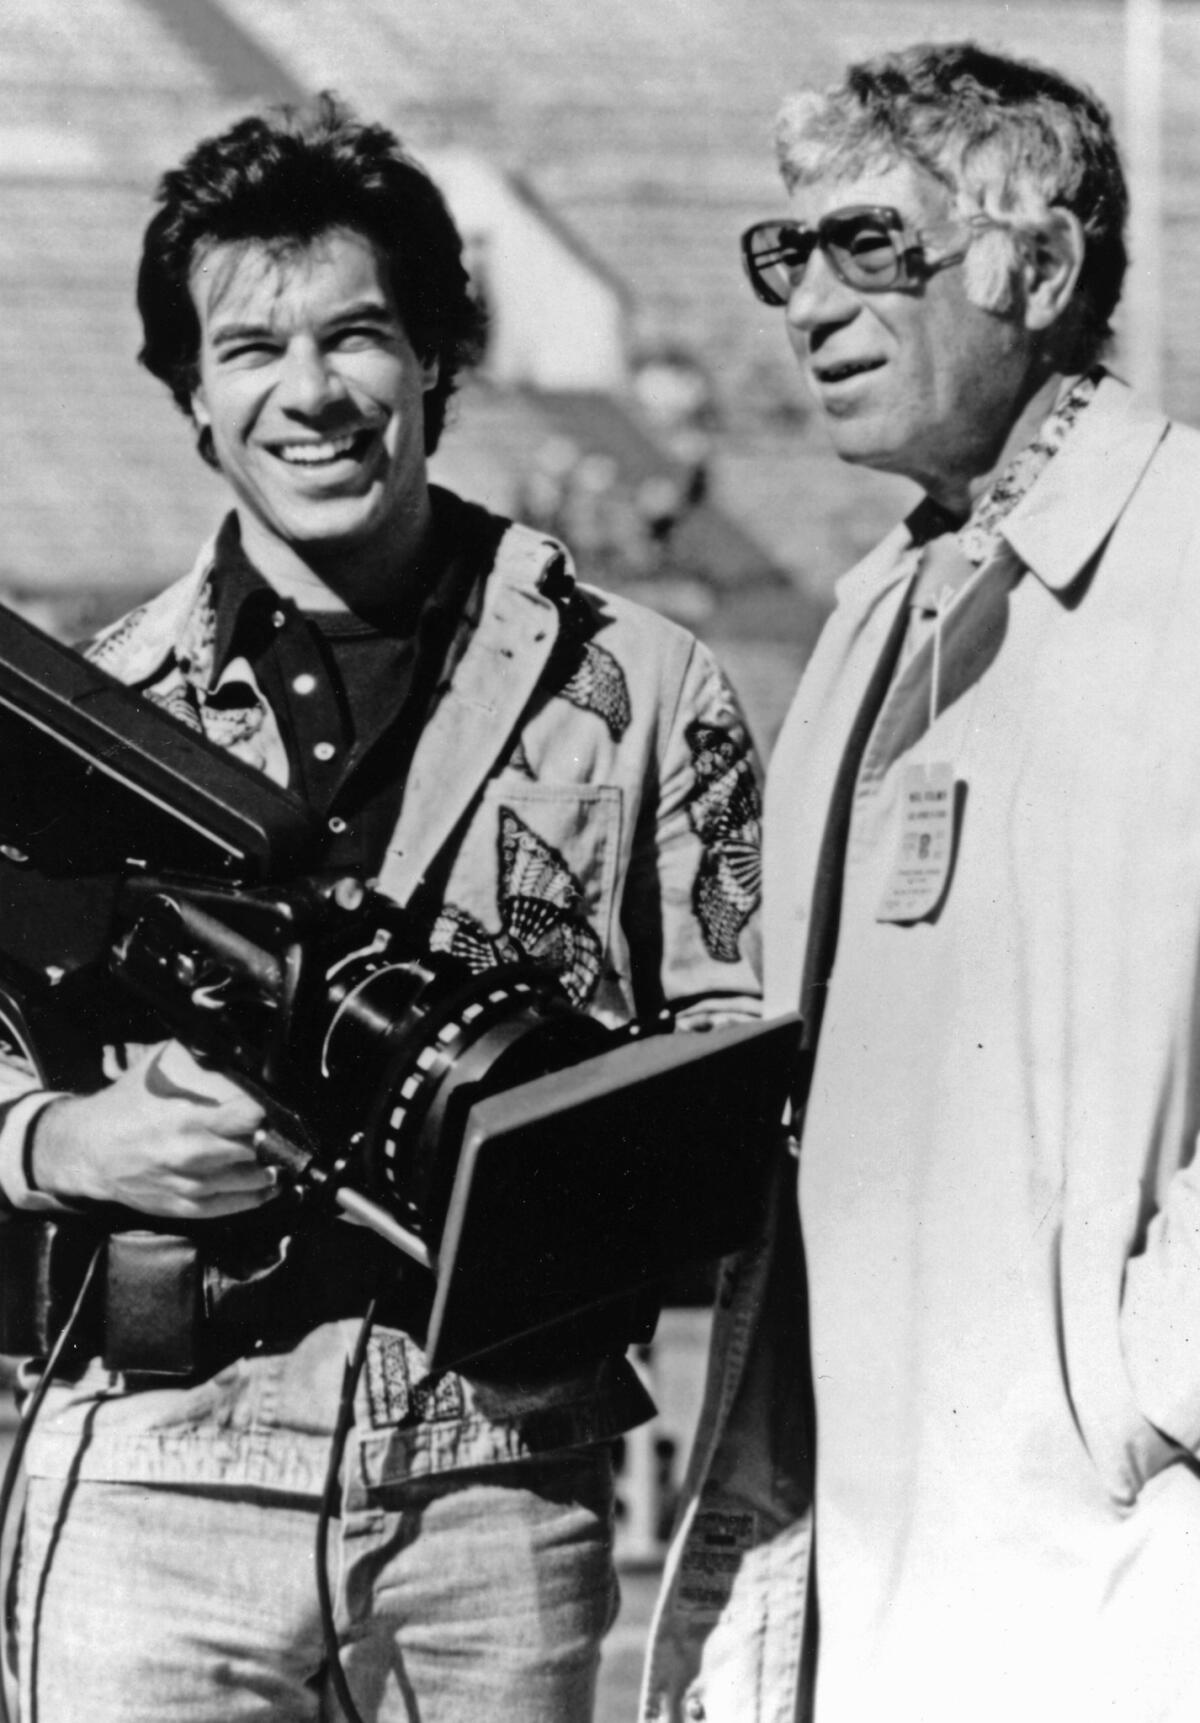 NFL Films founder Ed Sabol, right, and his son, Steve, in an undated photo.